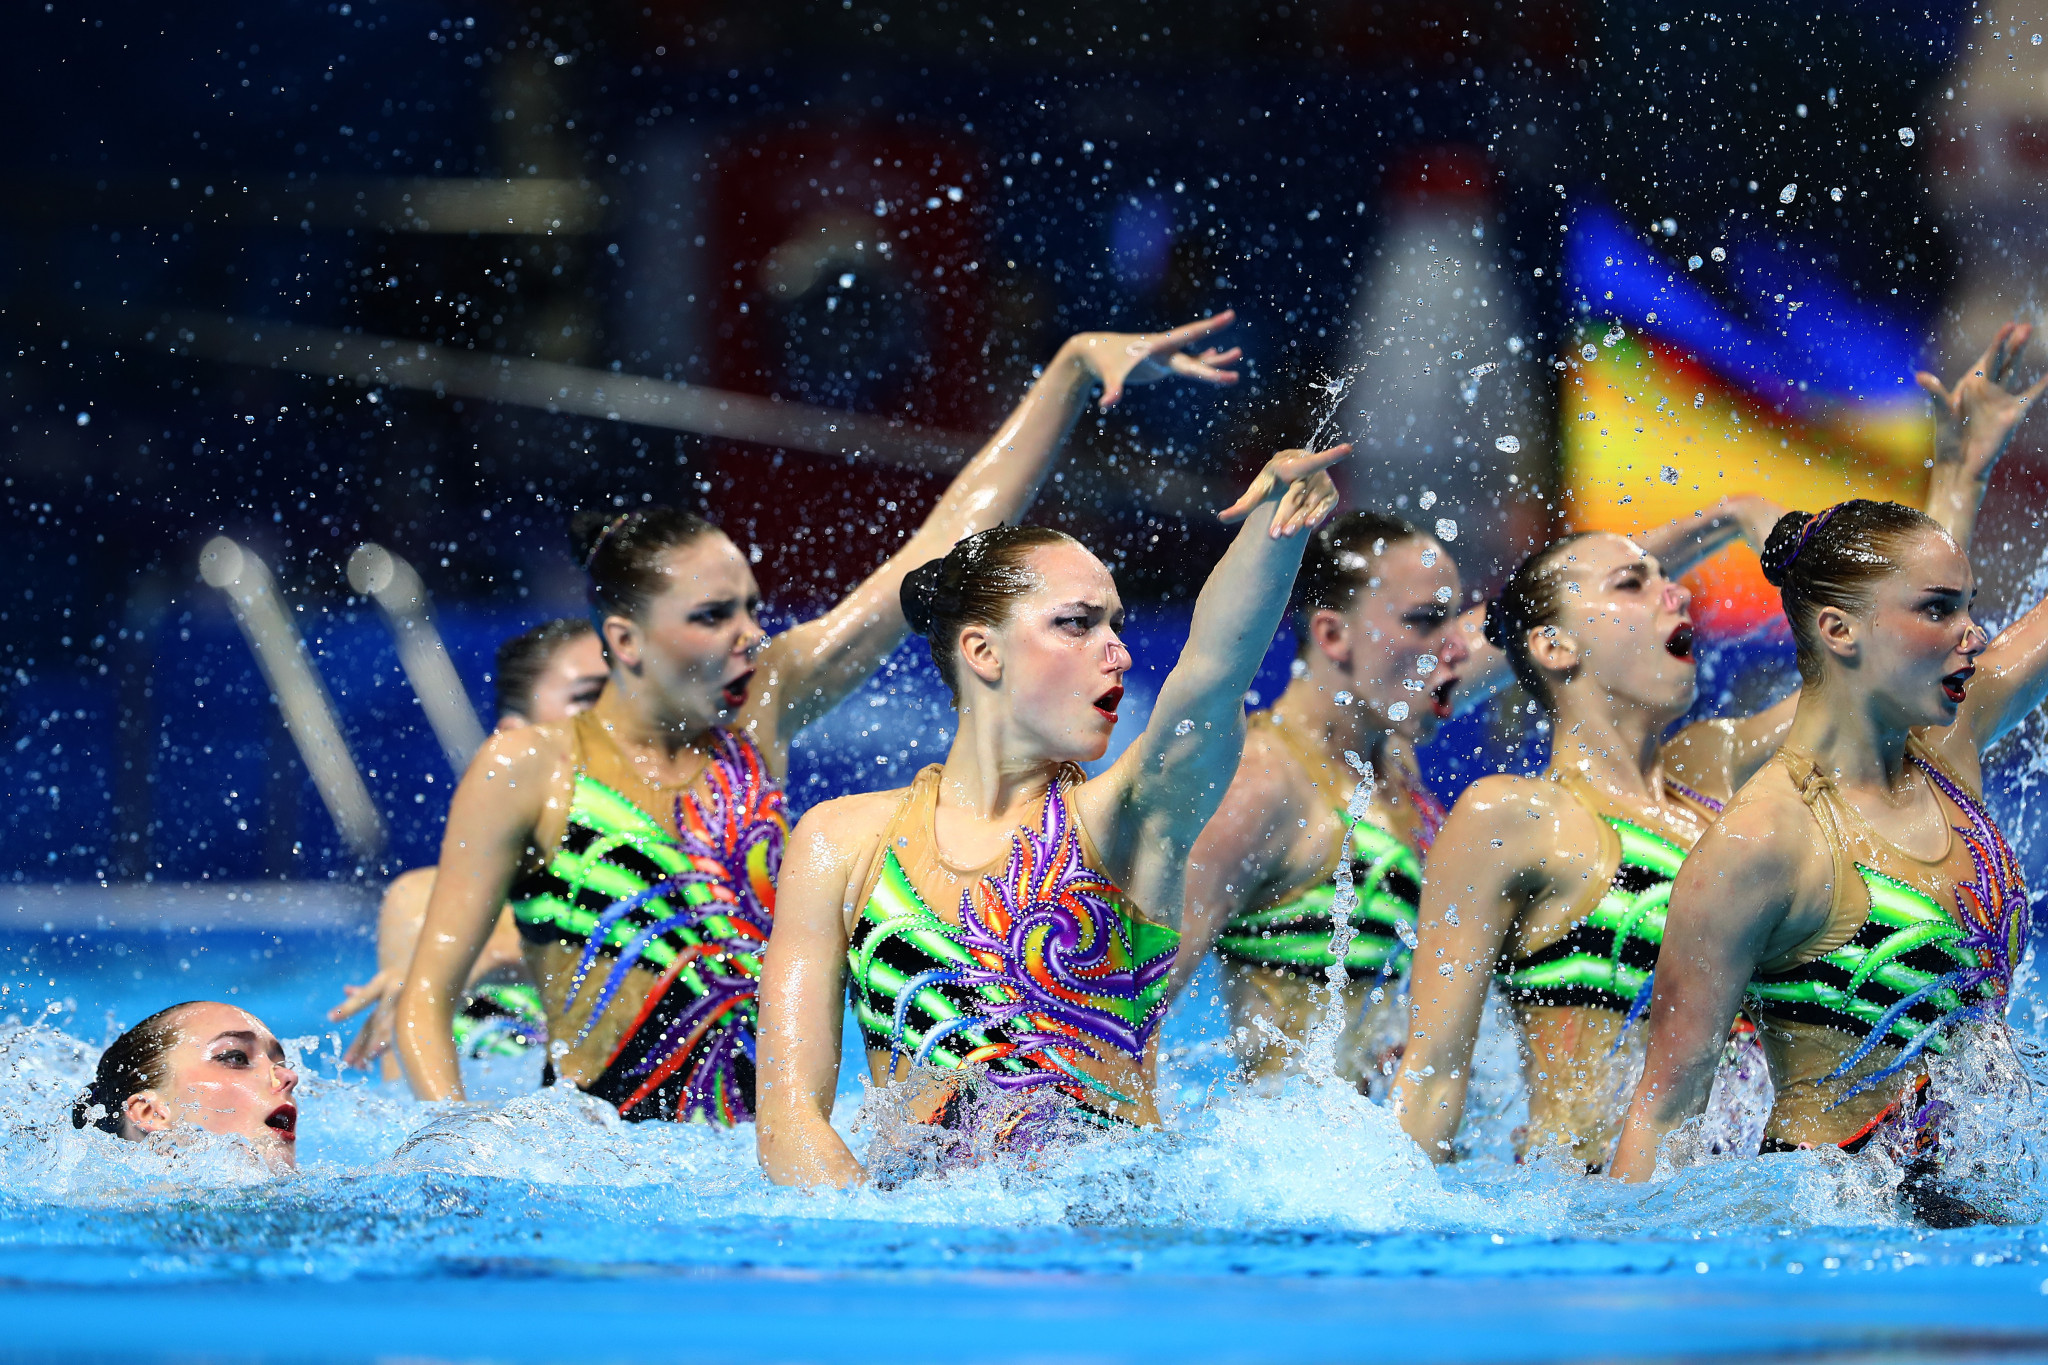 Ukraine's artistic swimmers won gold in the highlight routine event  ©Getty Images